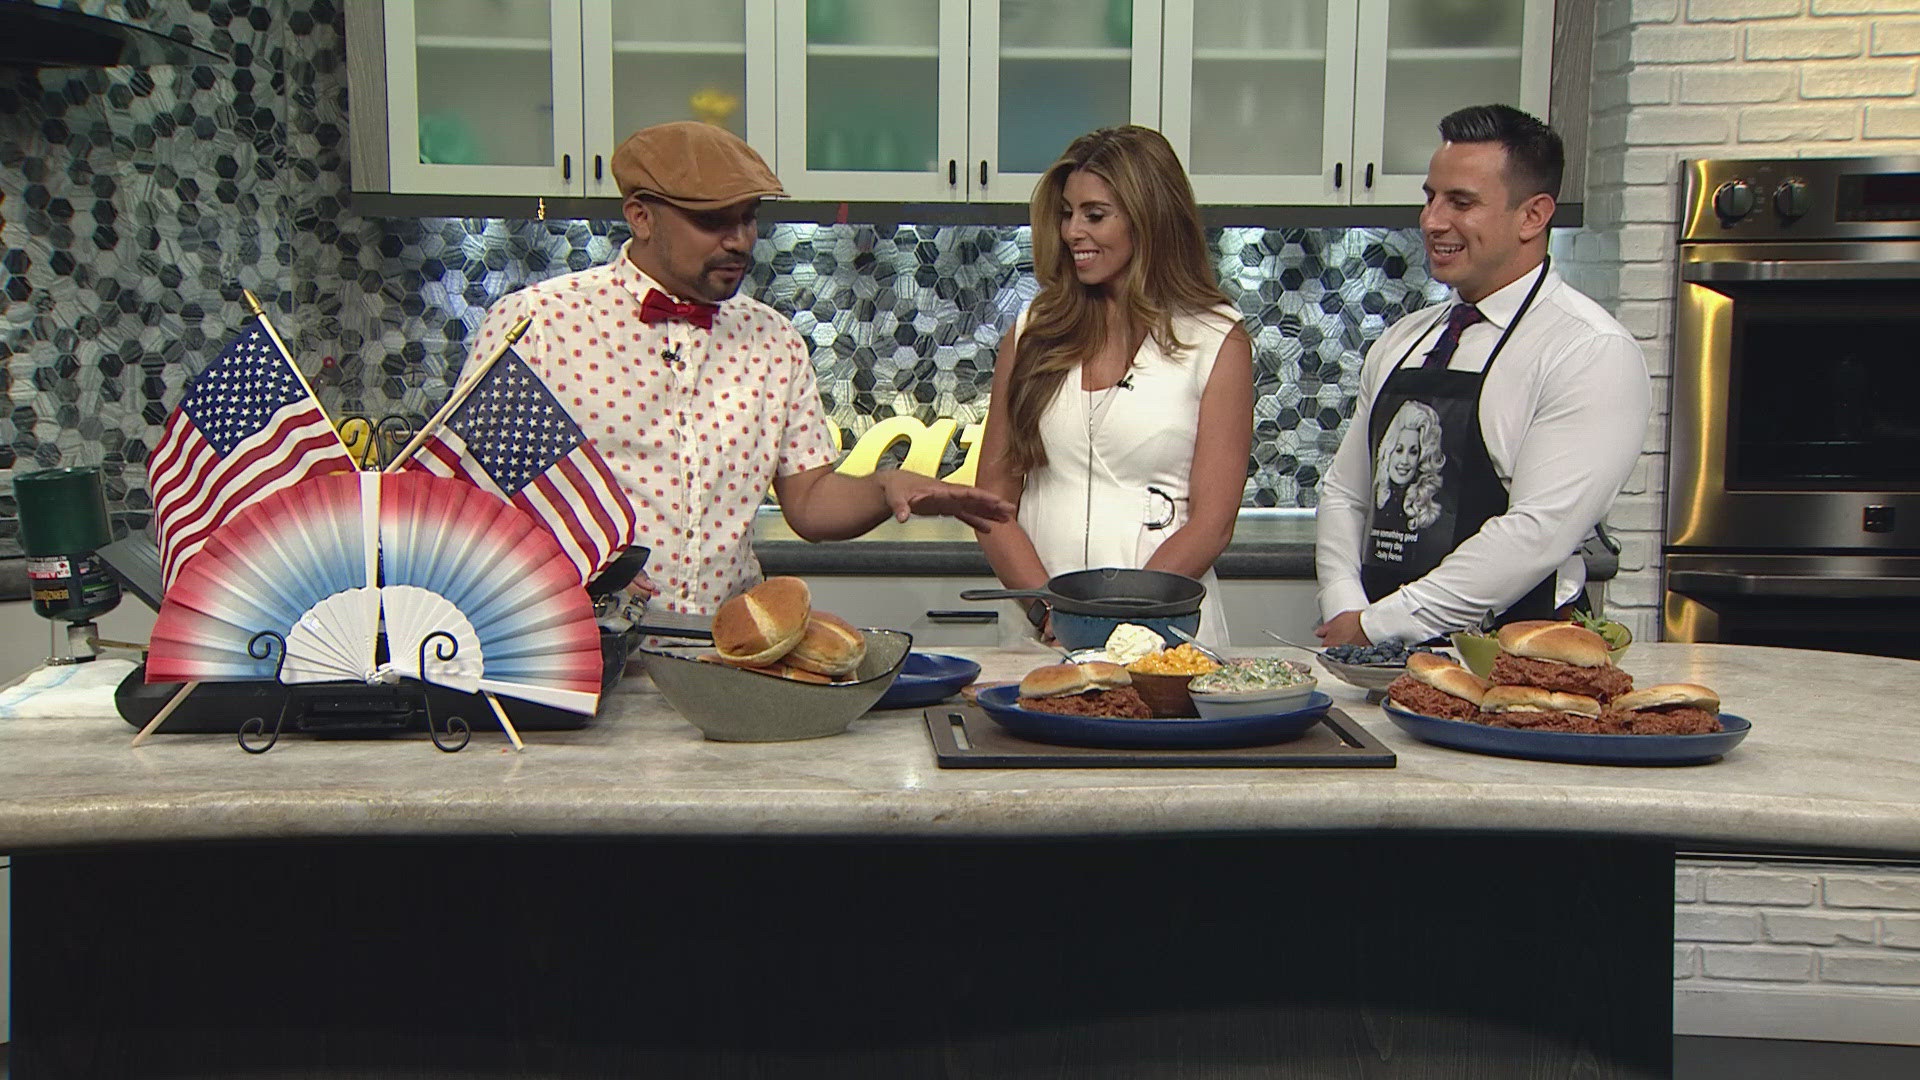 Chef Oscar Padilla shares some quick and easy recipes to make for a festive 4th of July gathering.